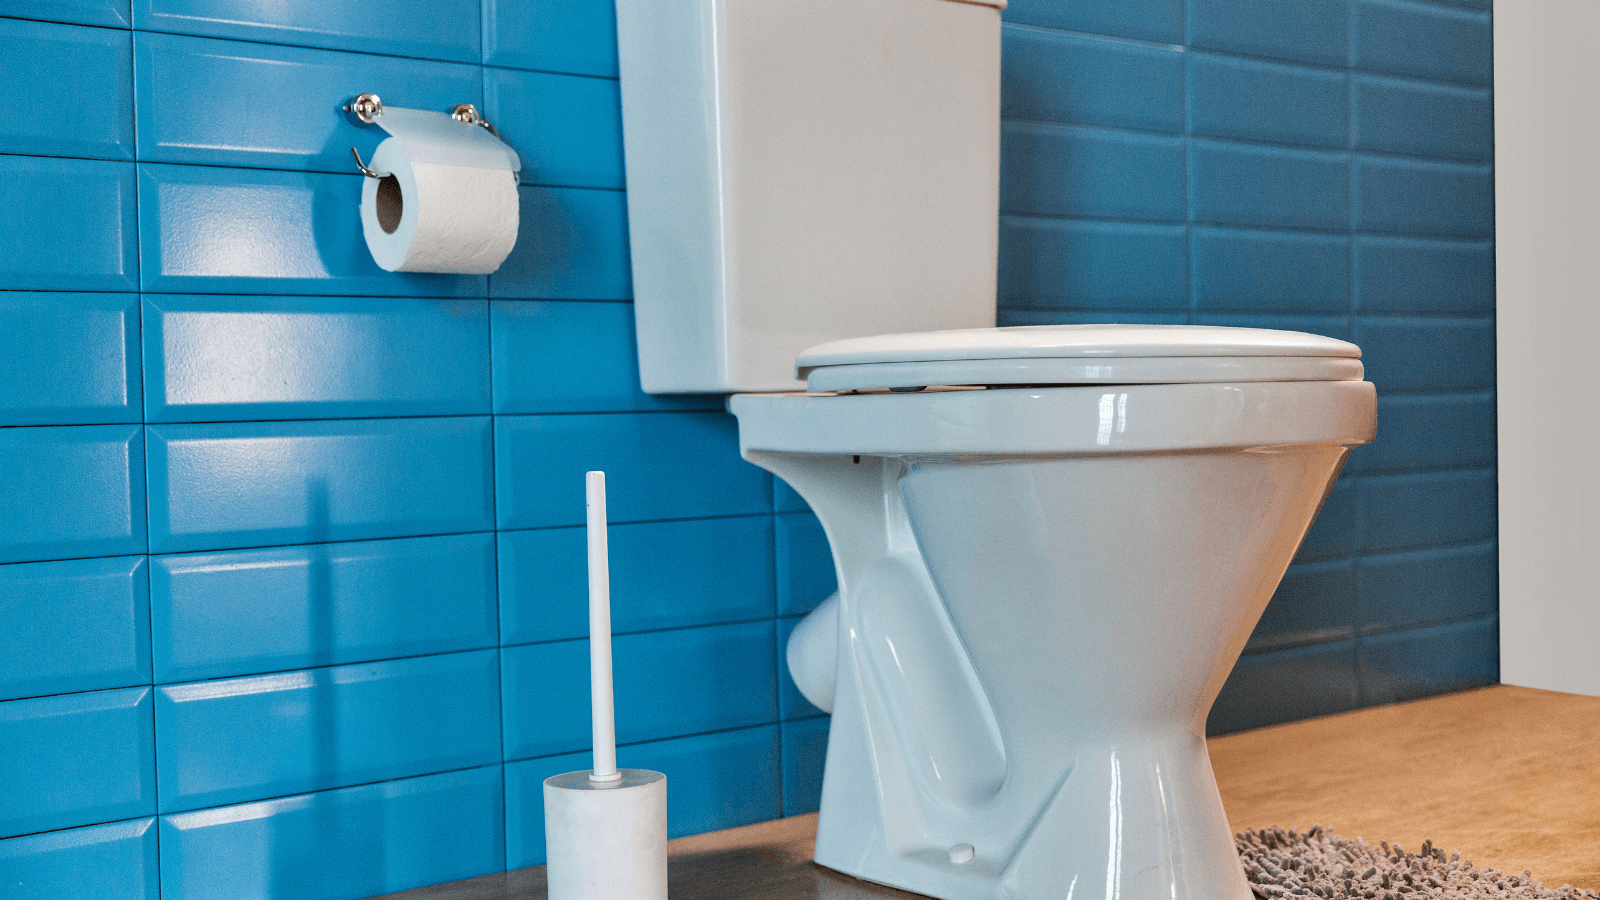 PLUMBING SERVICE PROFESSIONAL’S BUYING GUIDE FOR TOILETS